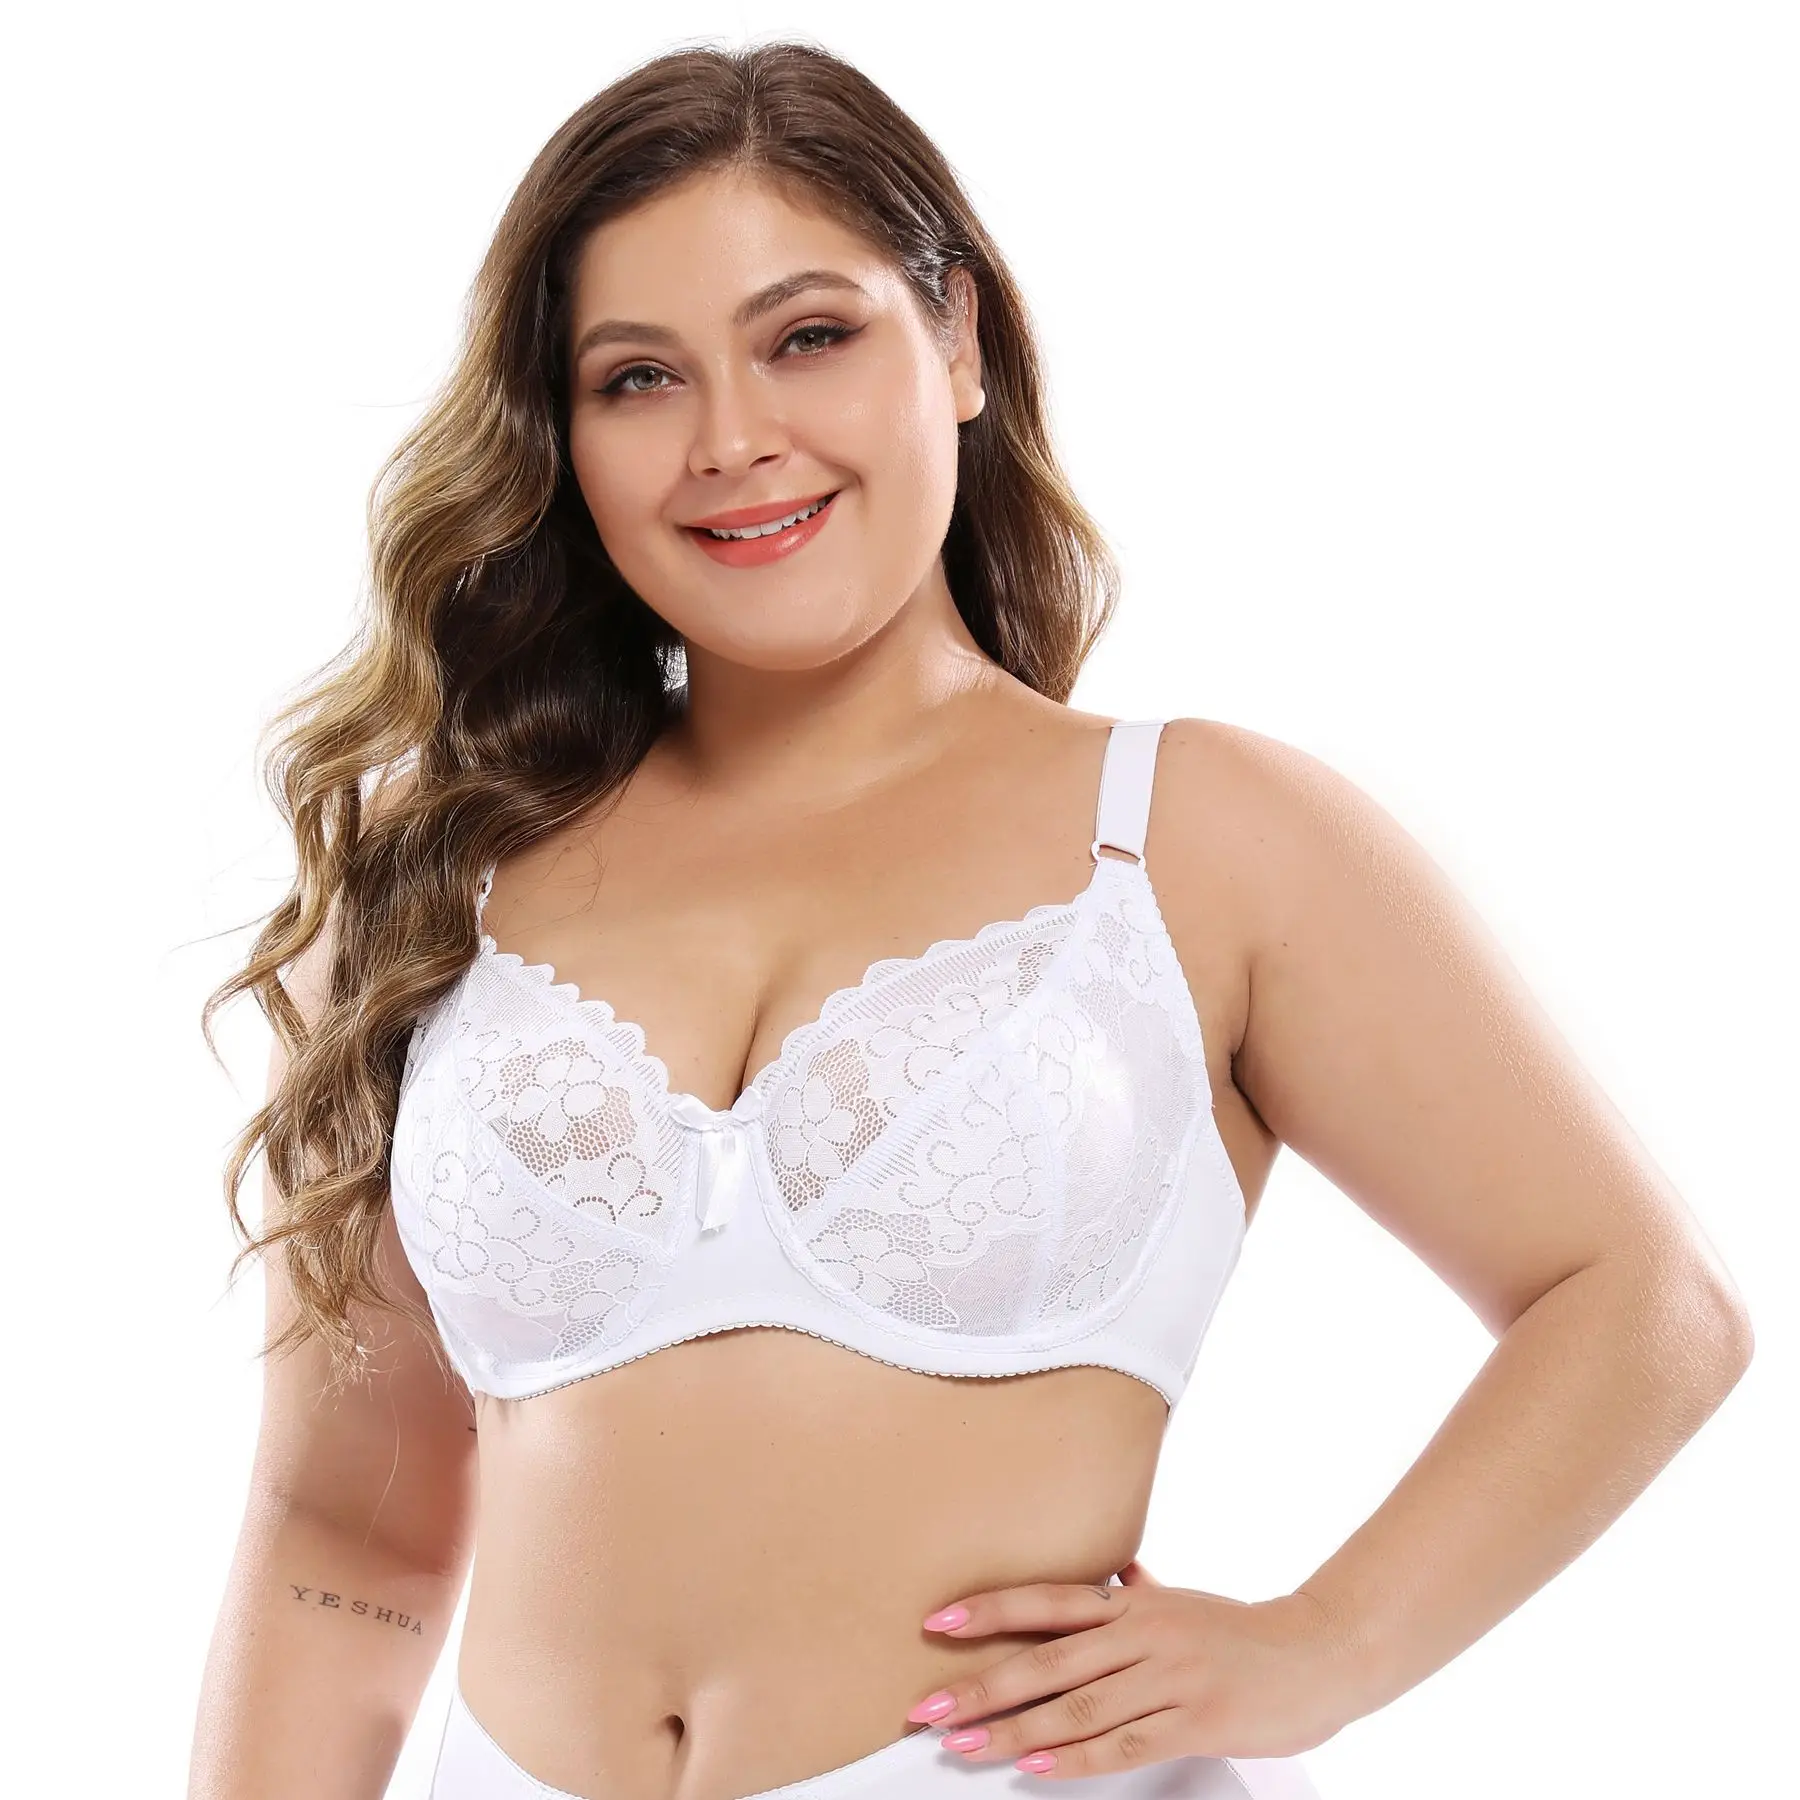 

2021 adjustable fat m large size bra europe d e large cup lace thin big cup bra underwire Lace plus-size bra For Fat Women, Black,white,red,dark blue,cameo brown,cream-coloured